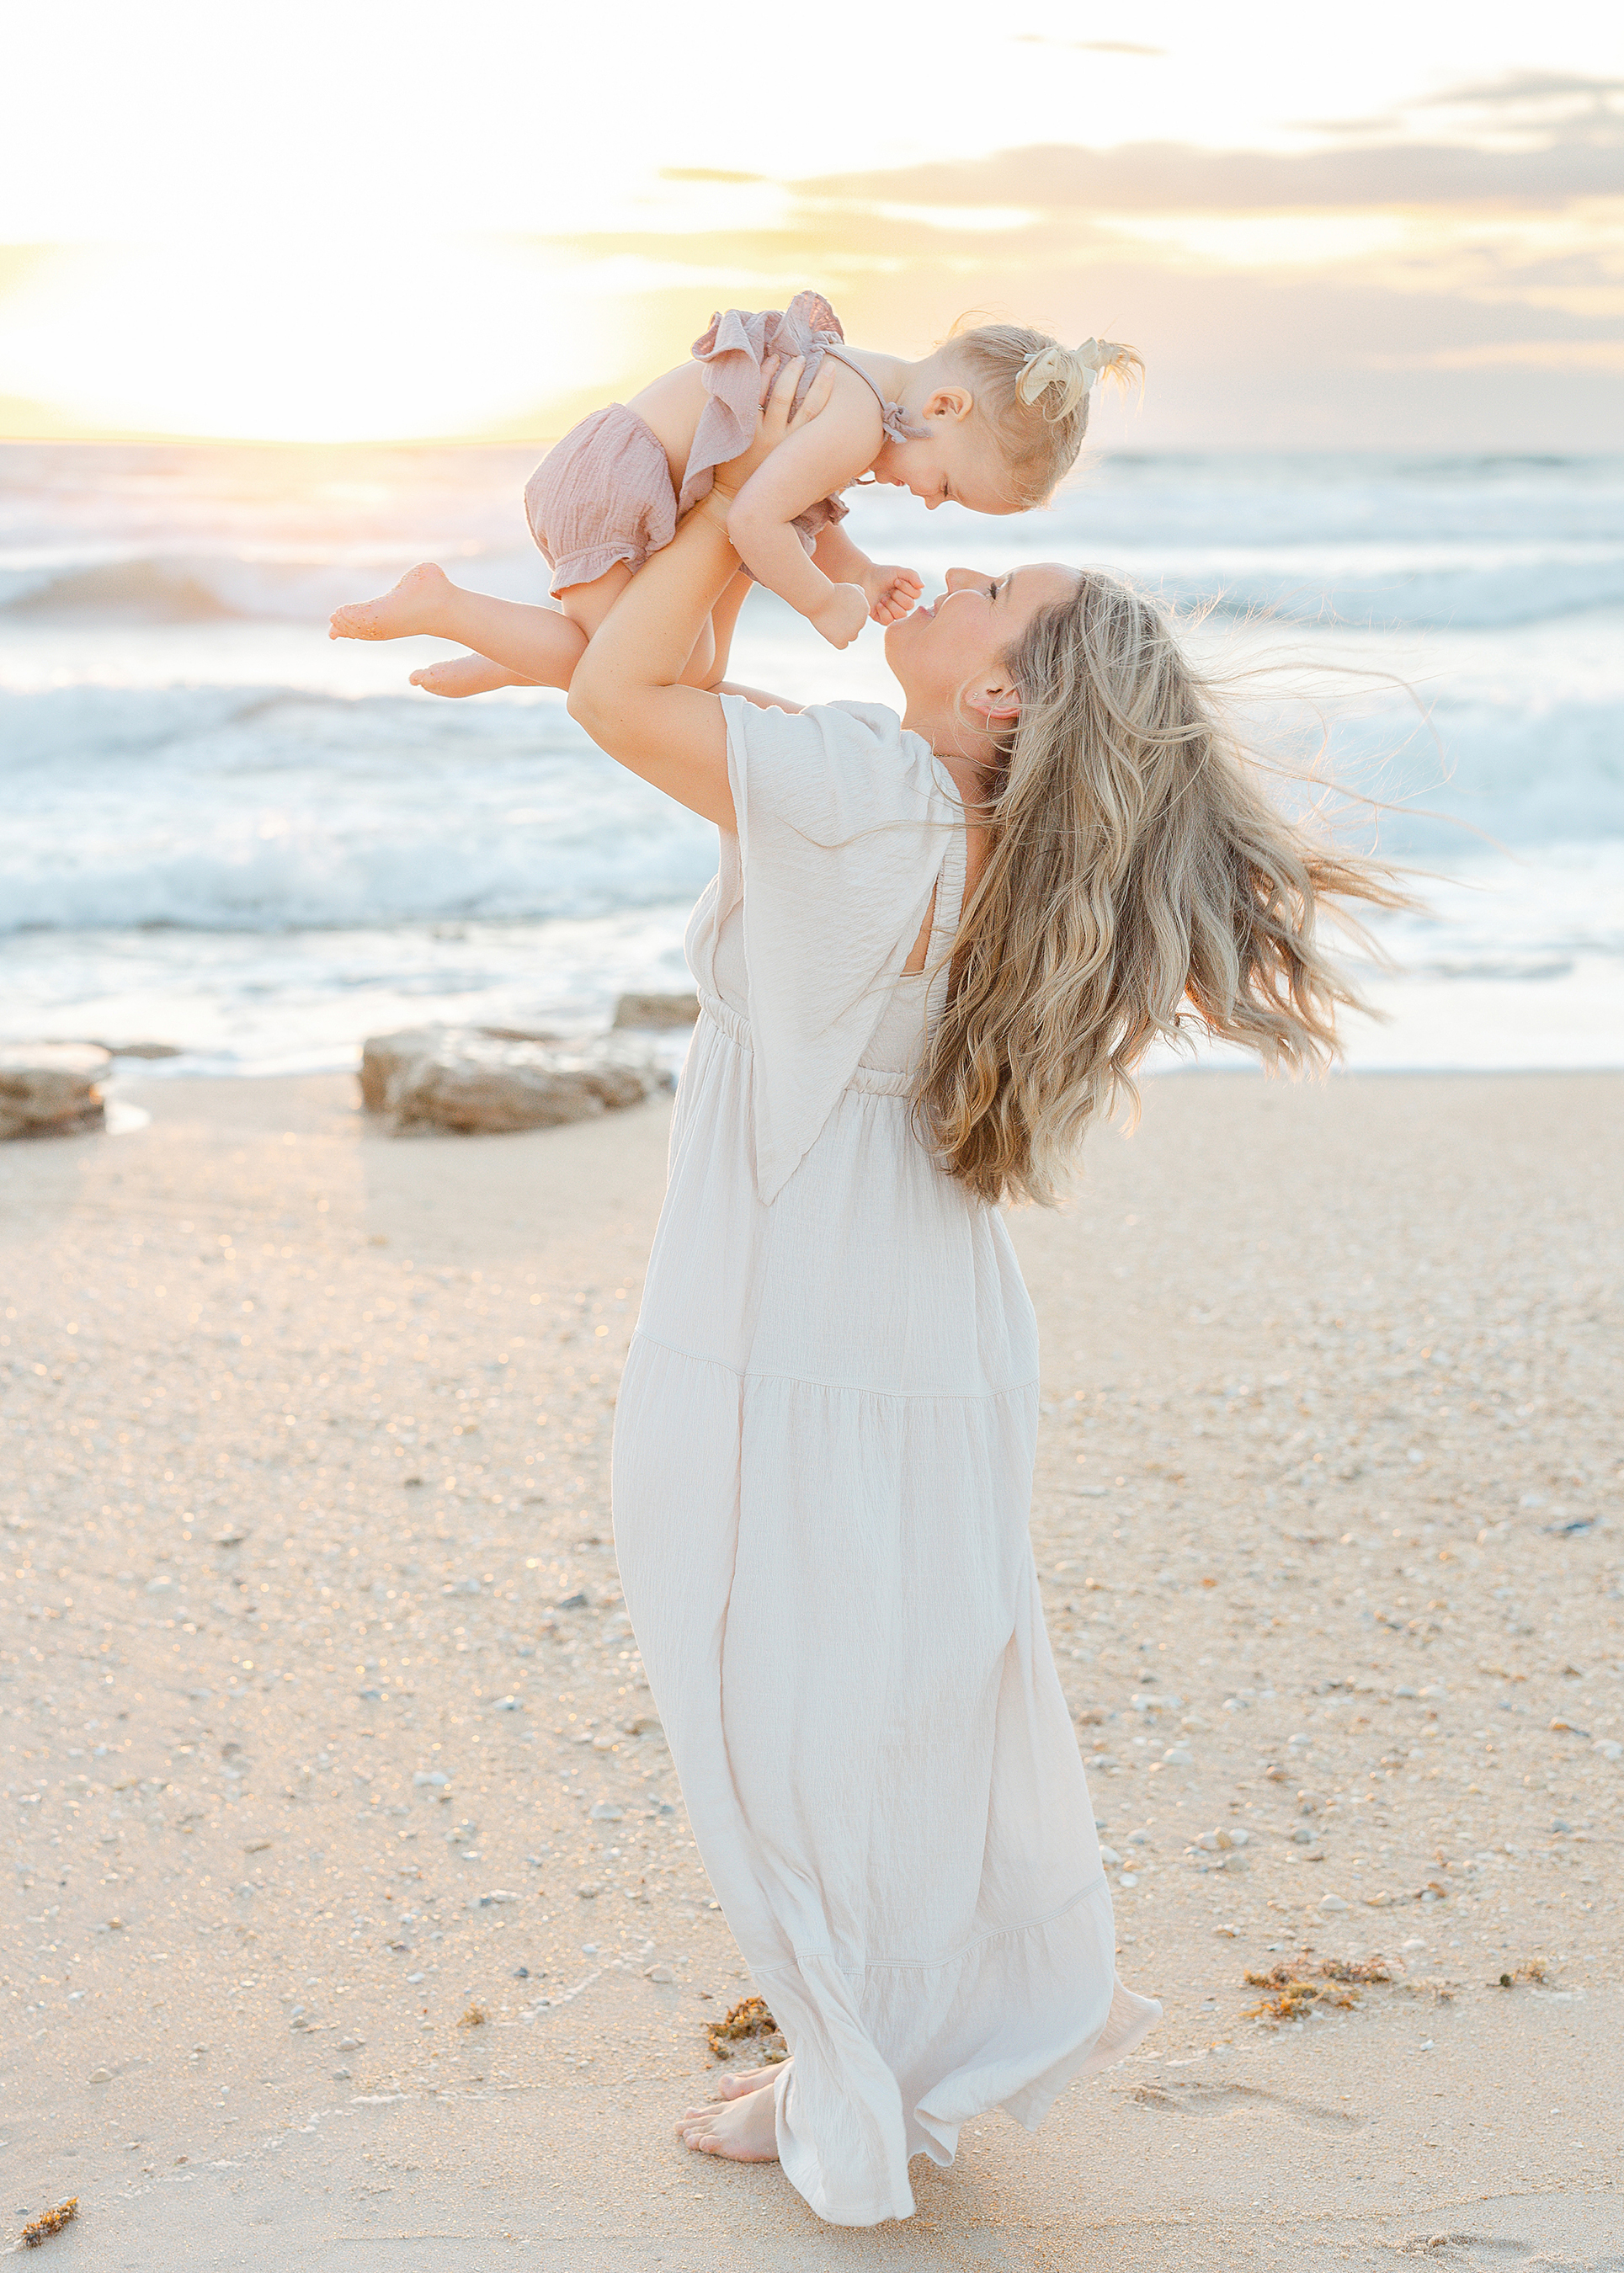 Woman holding baby girl in the air on the beach at sunrise kissing.